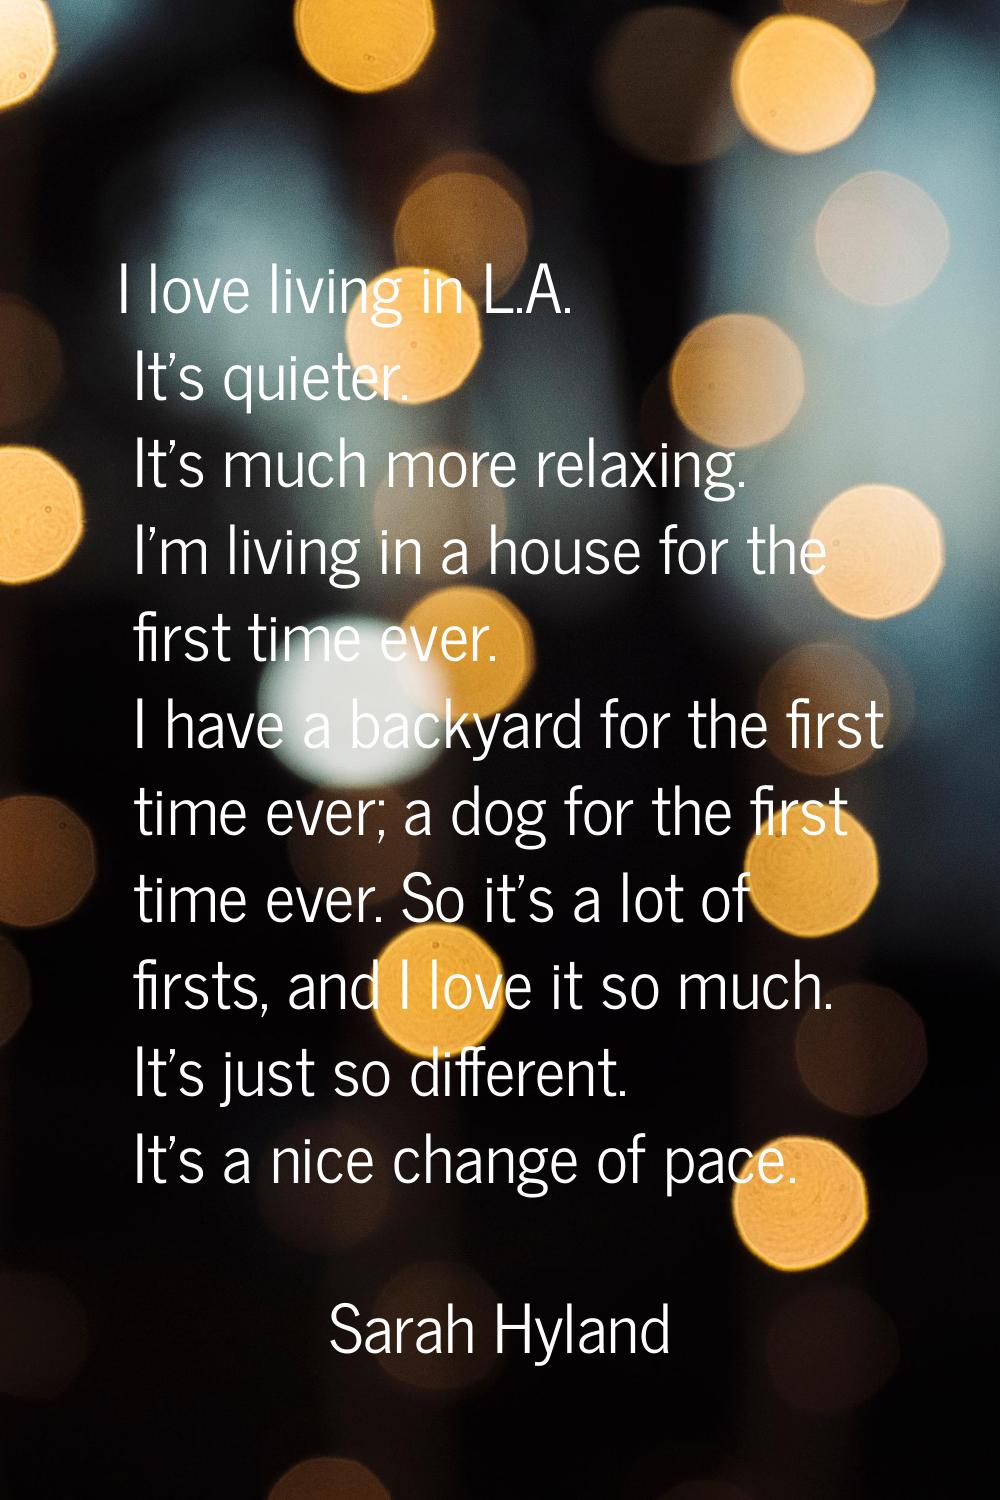 I love living in L.A. It's quieter. It's much more relaxing. I'm living in a house for the first ti